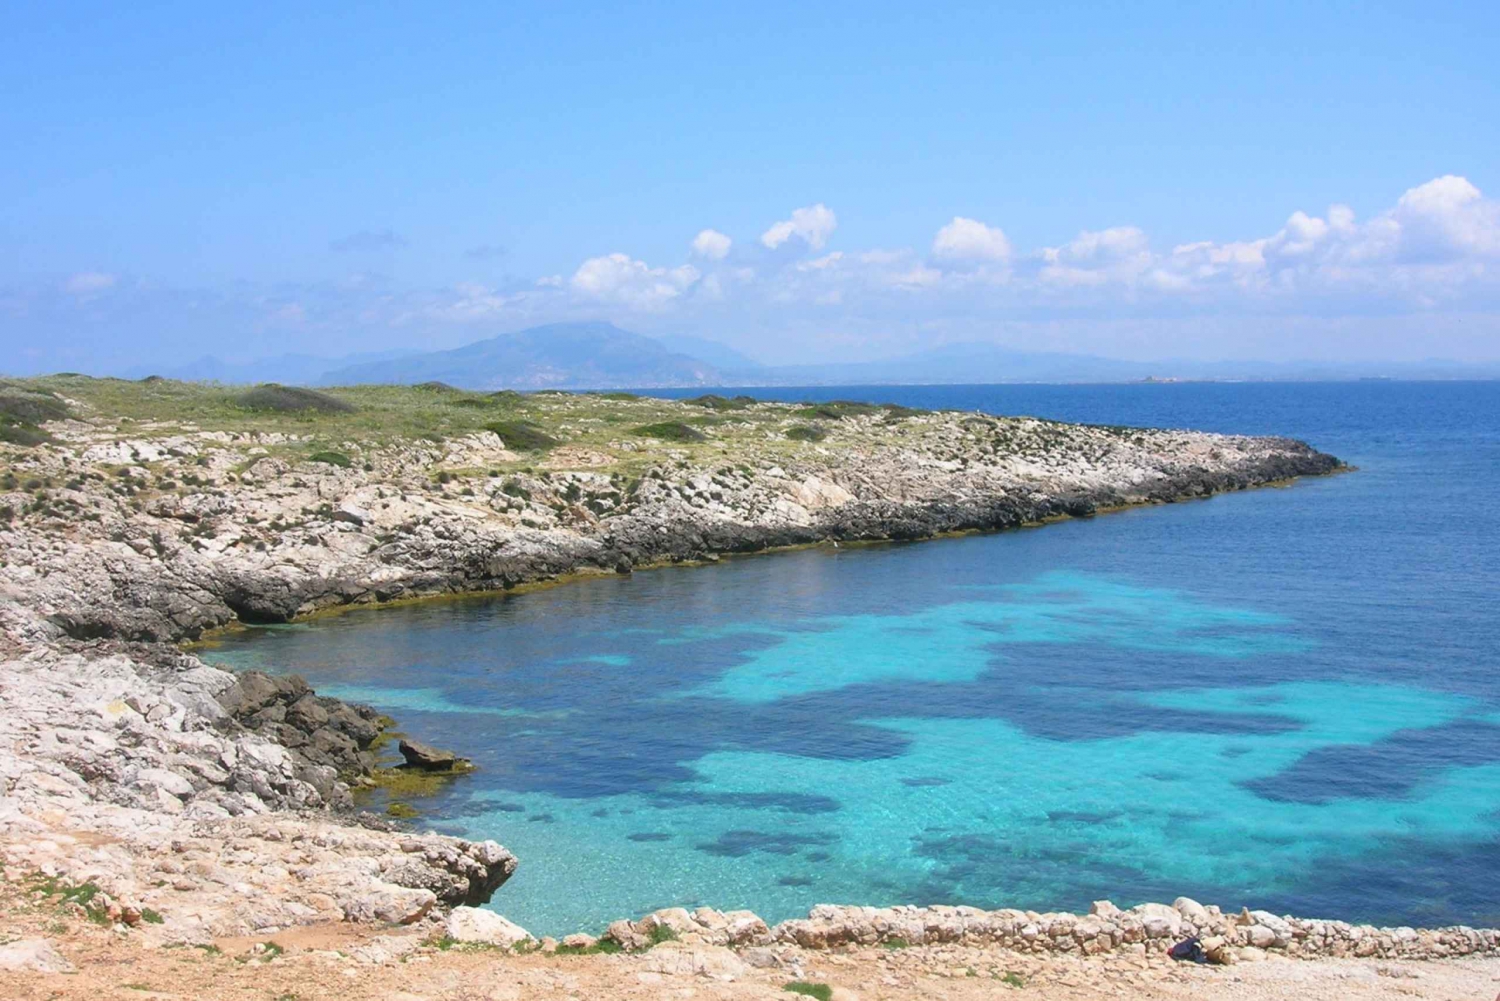 From Trapani: Cruise to Favignana and Levanzo with lunch